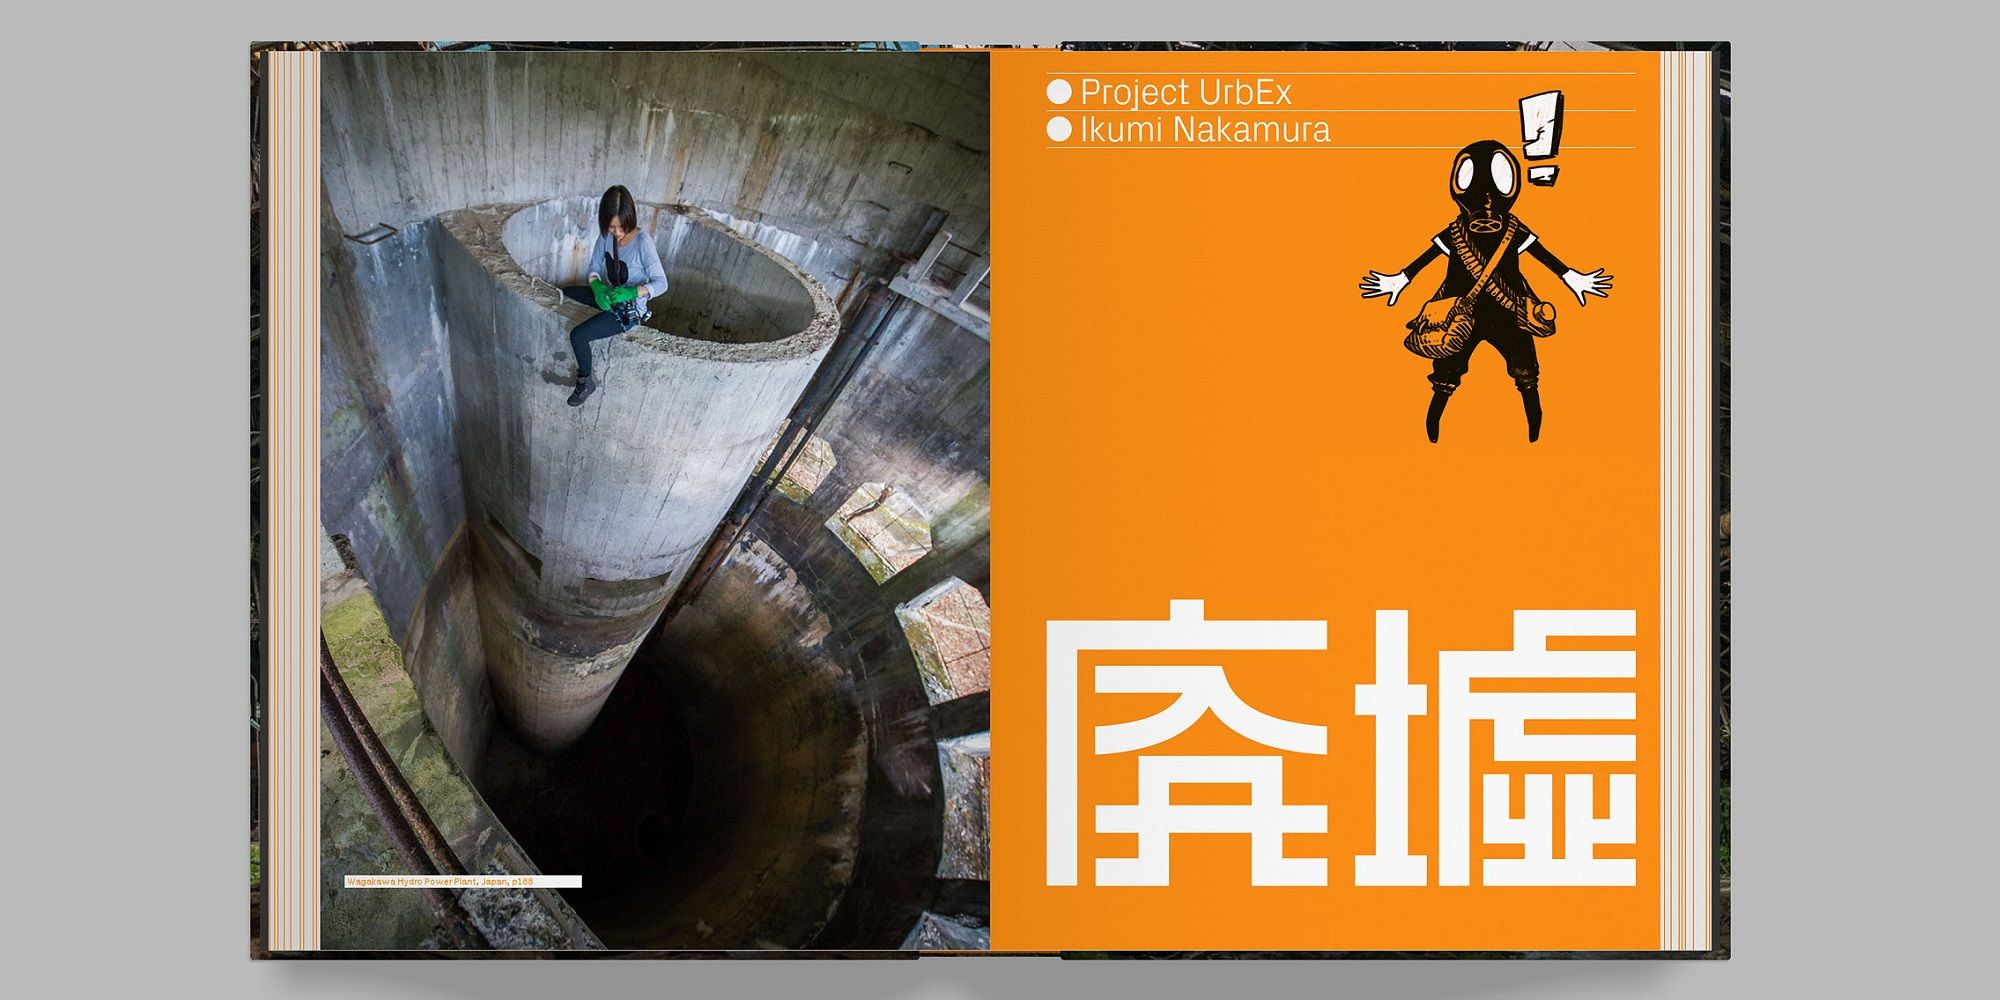 ikumi nakamura sitting on a giant pipe in project urbex